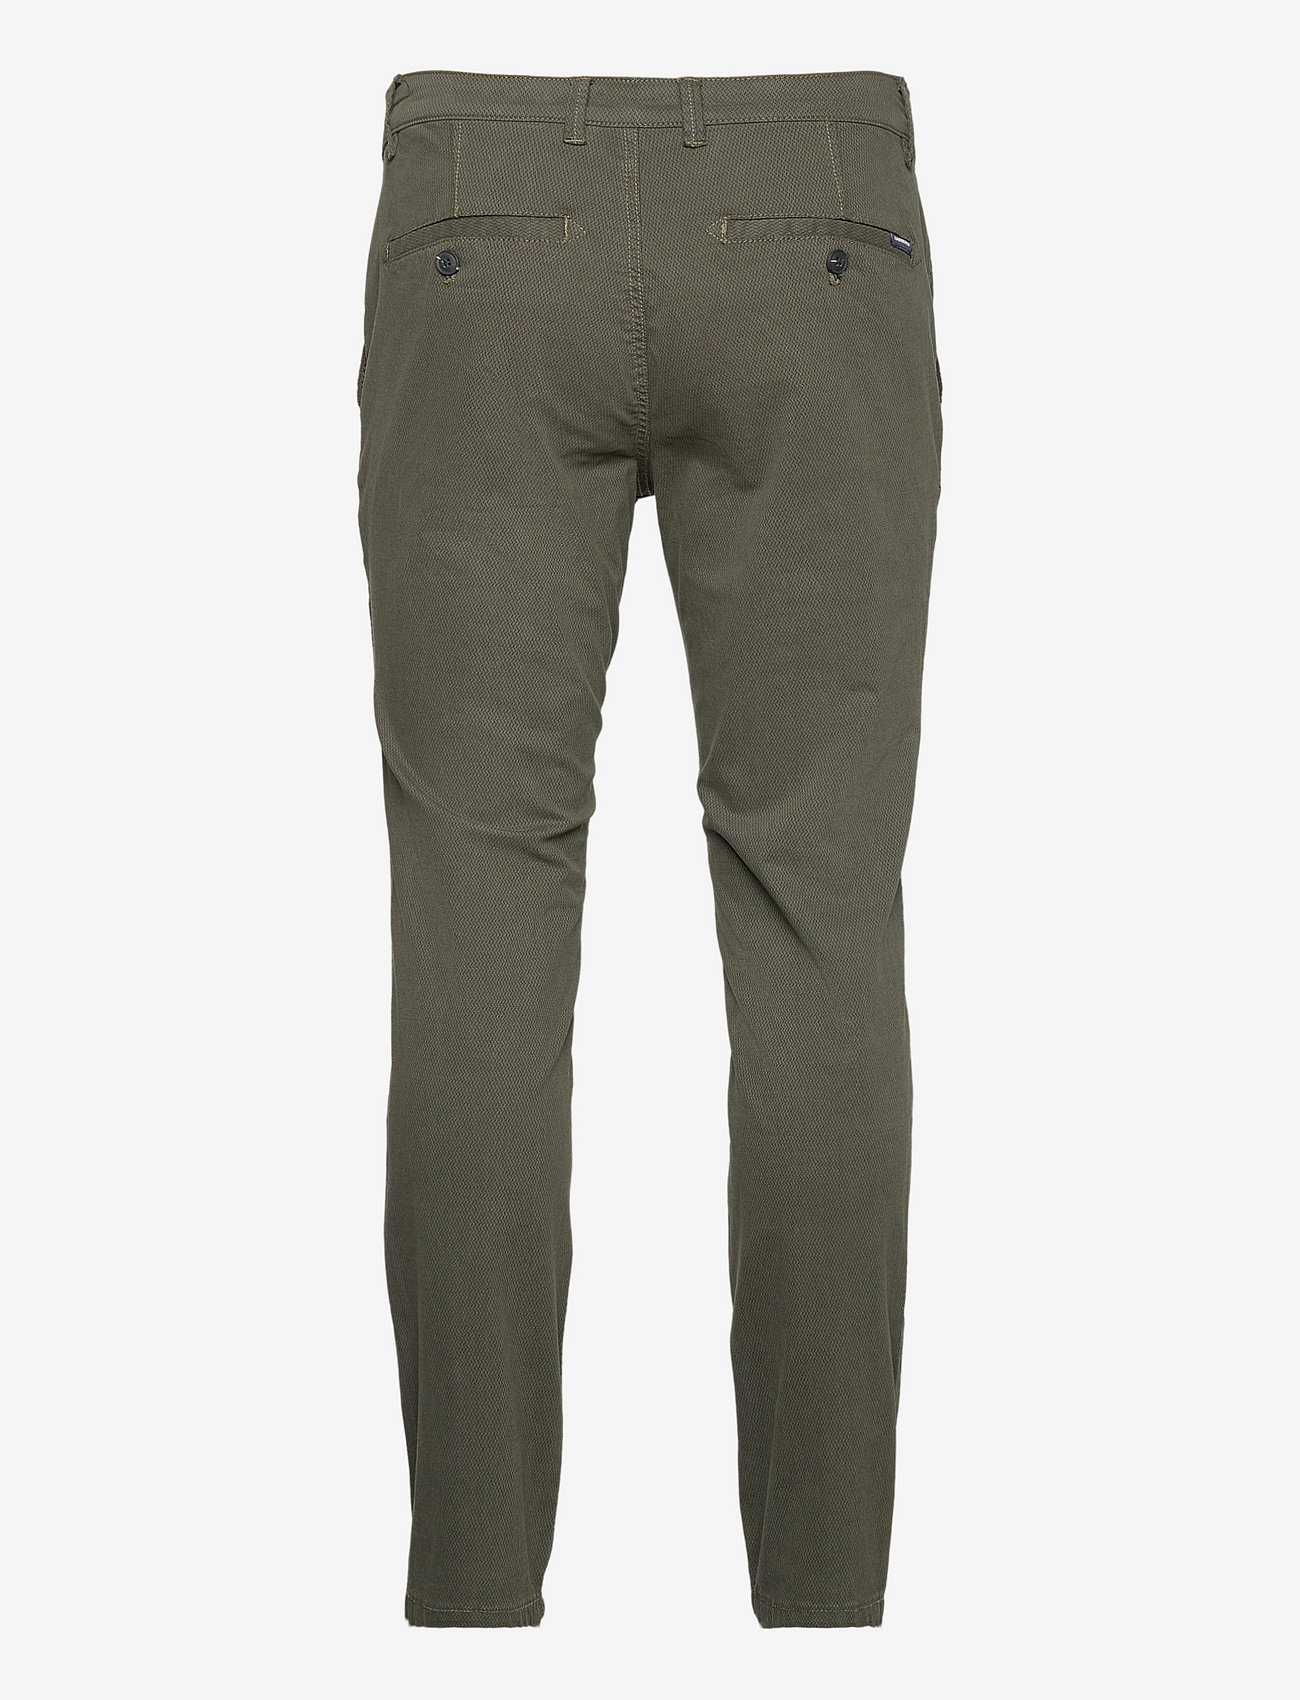 Lindbergh - Structure superflex chinos - chino's - army - 1